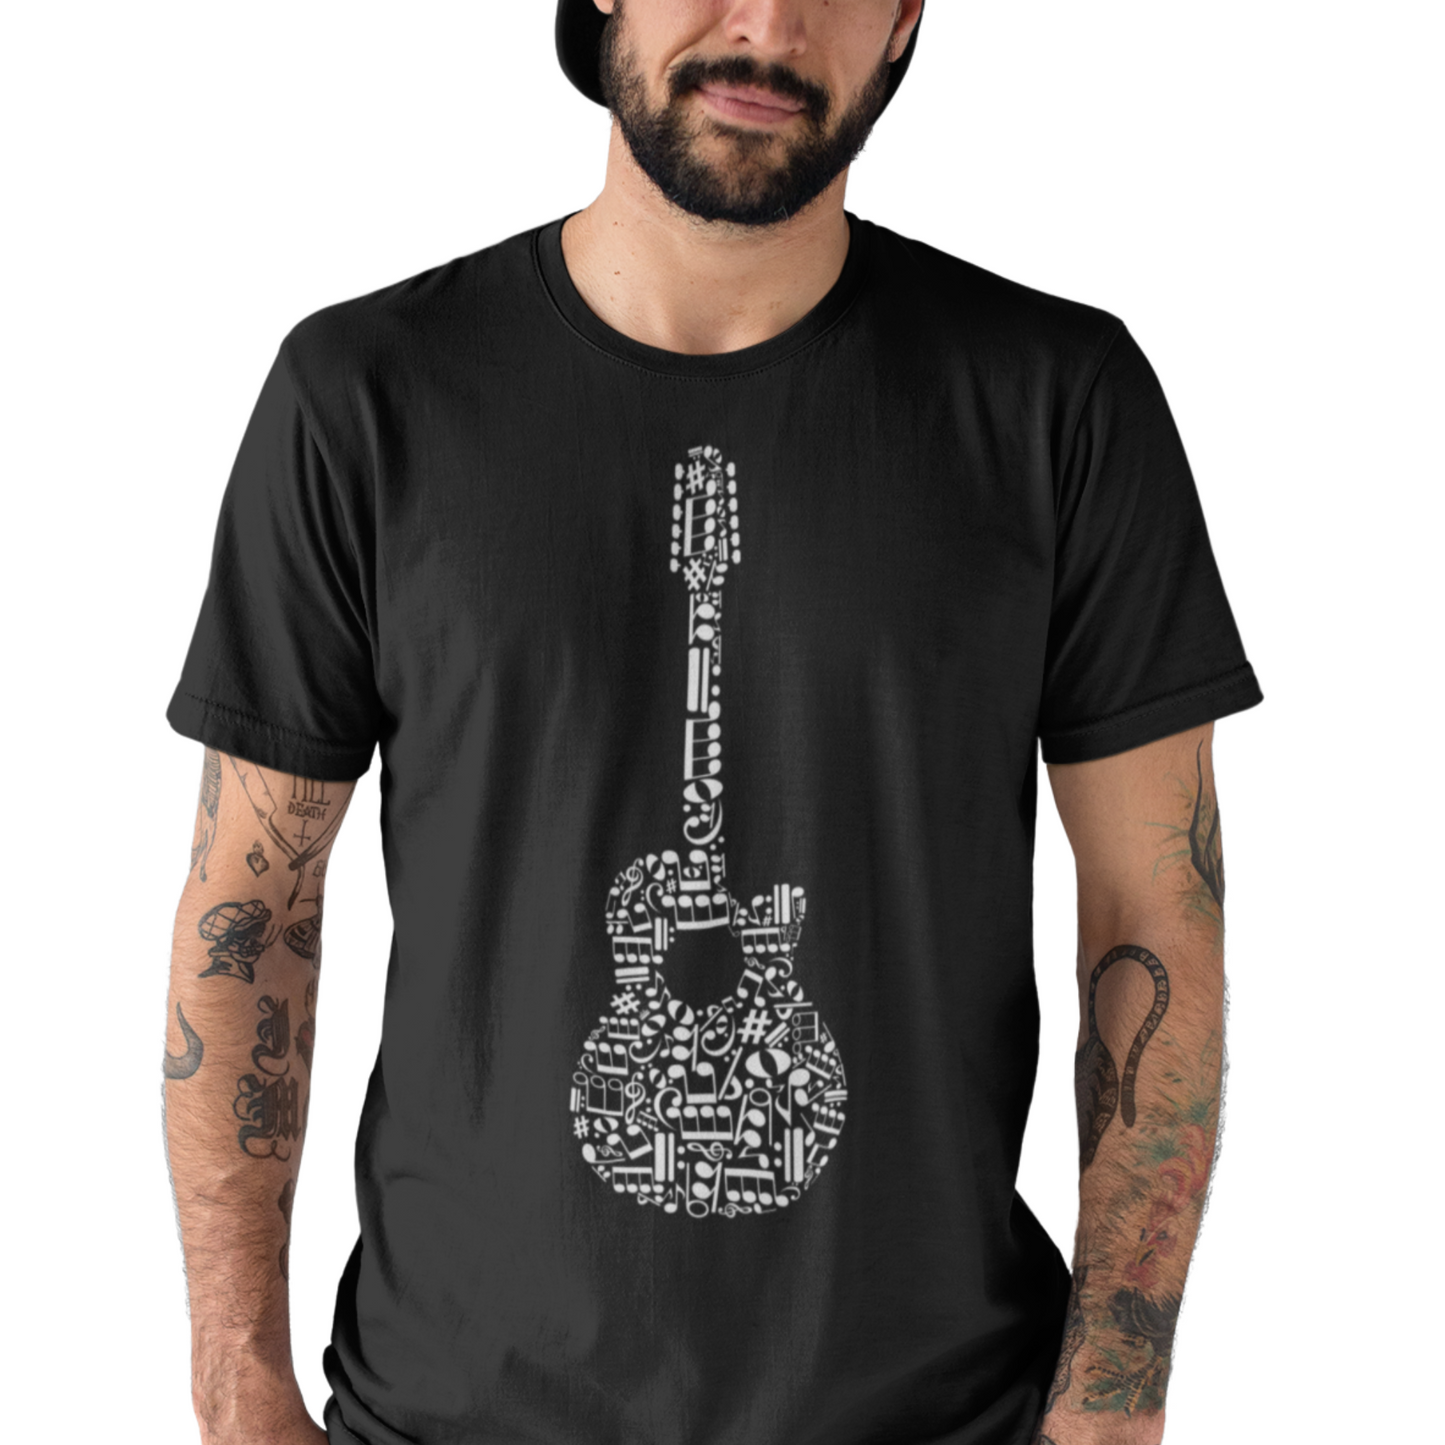 Man wears black cotton short sleeved t-shirt with printed acoustic guitar made up of musical notes.